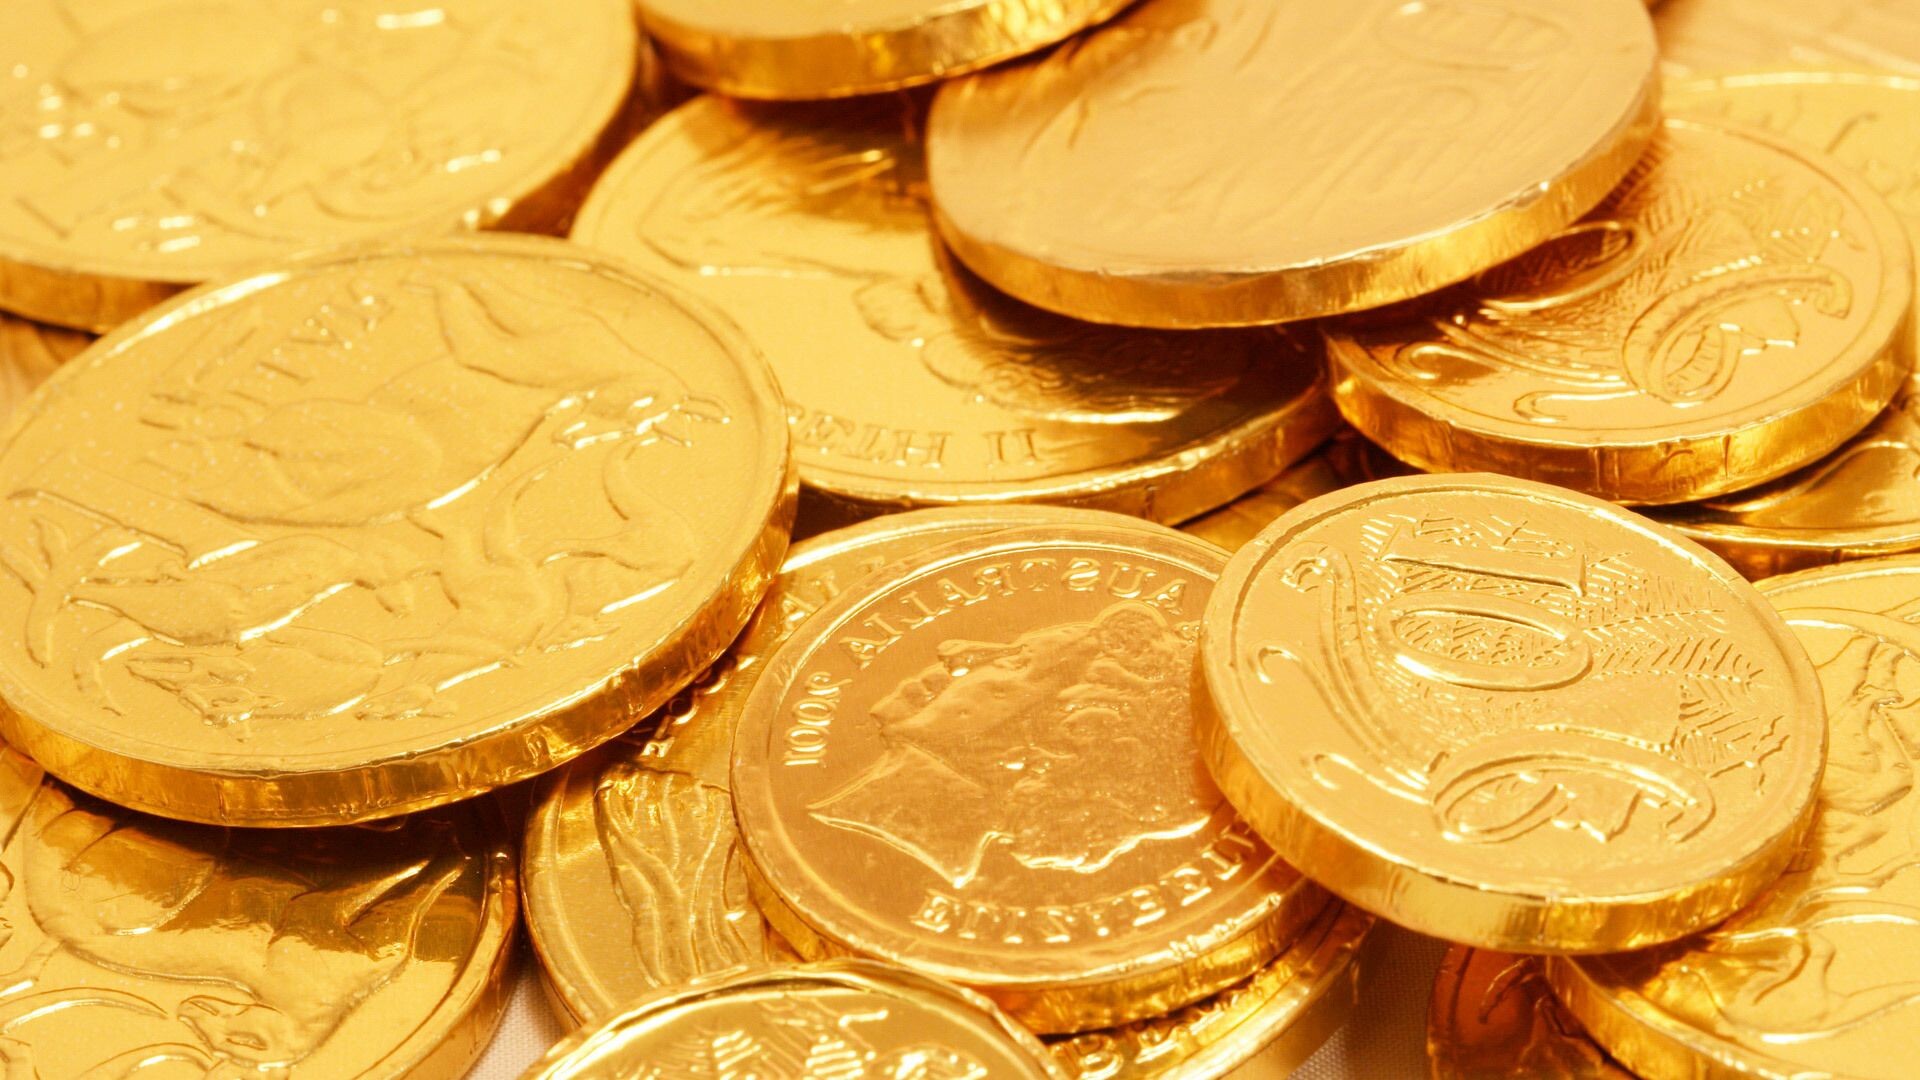 Precious gold coins, High-quality images, Wallpaper collection, Free download, 1920x1080 Full HD Desktop